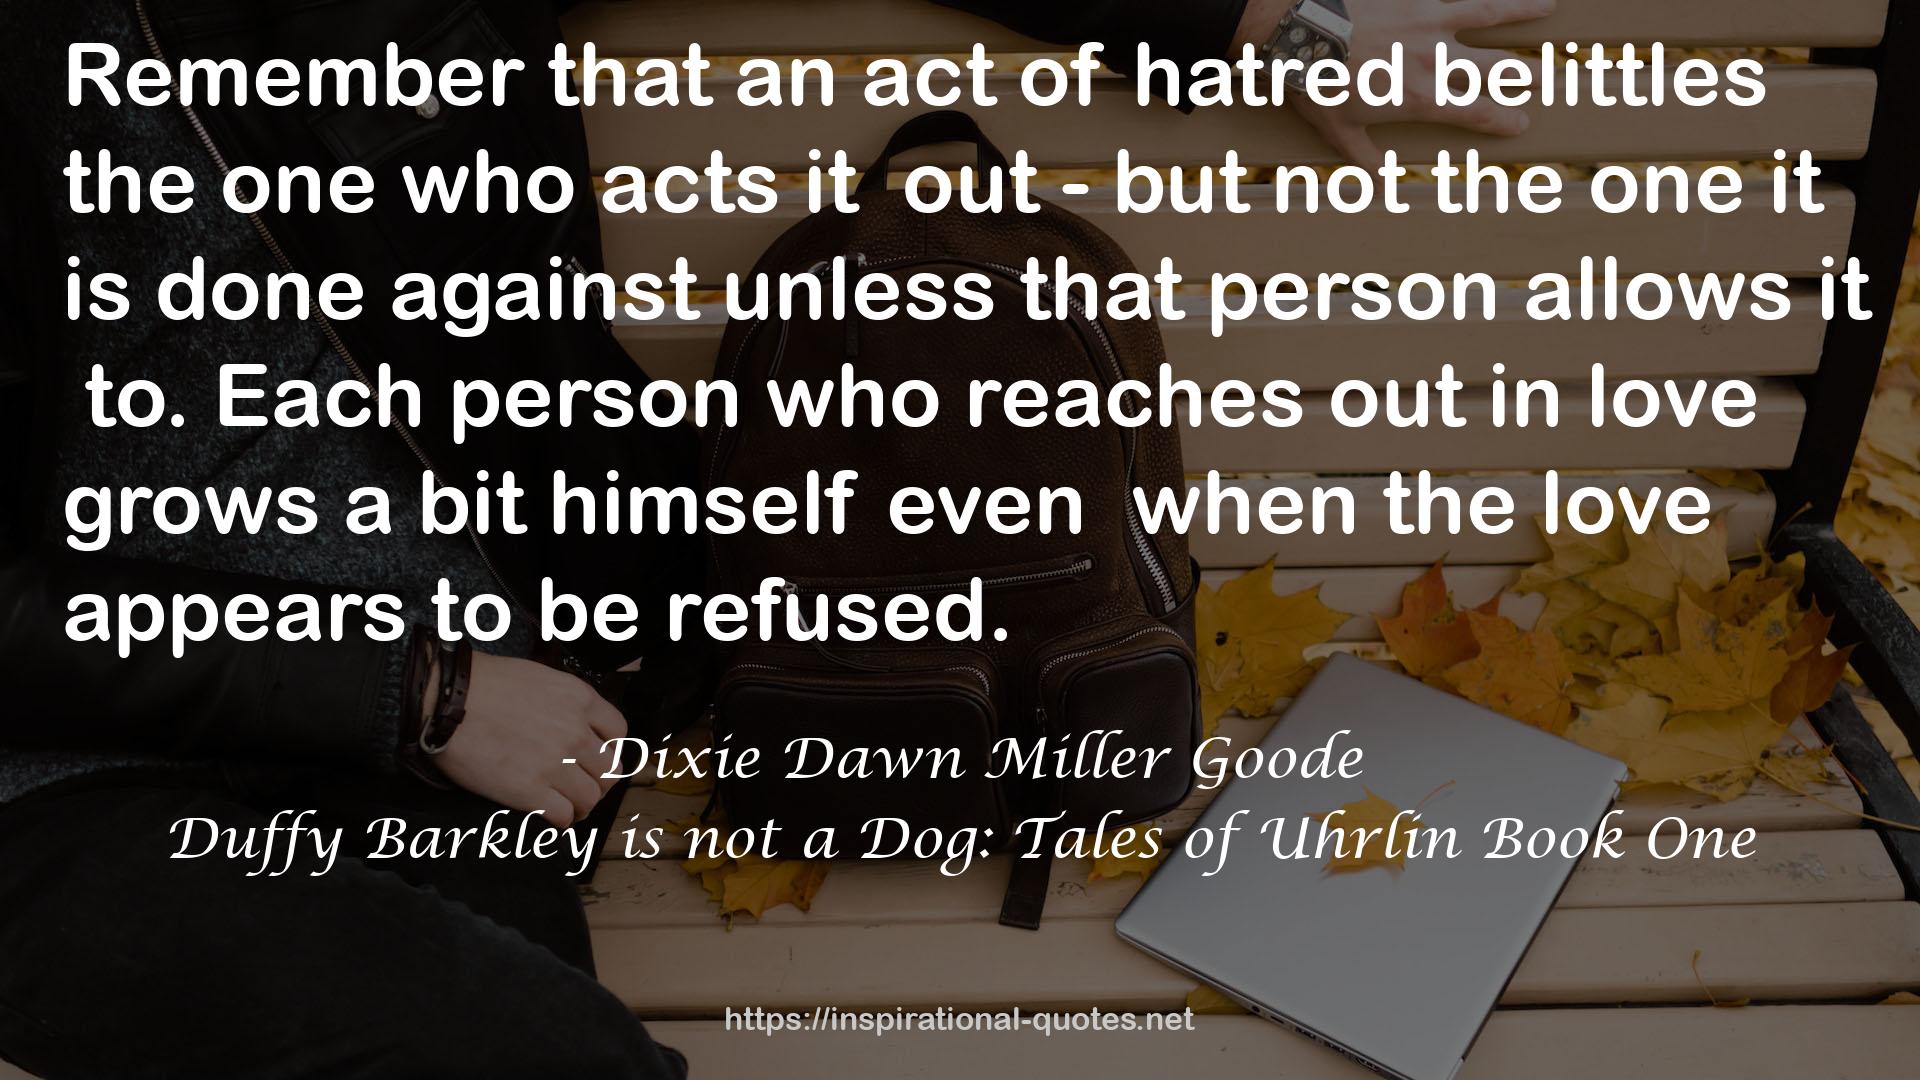 Duffy Barkley is not a Dog: Tales of Uhrlin Book One QUOTES